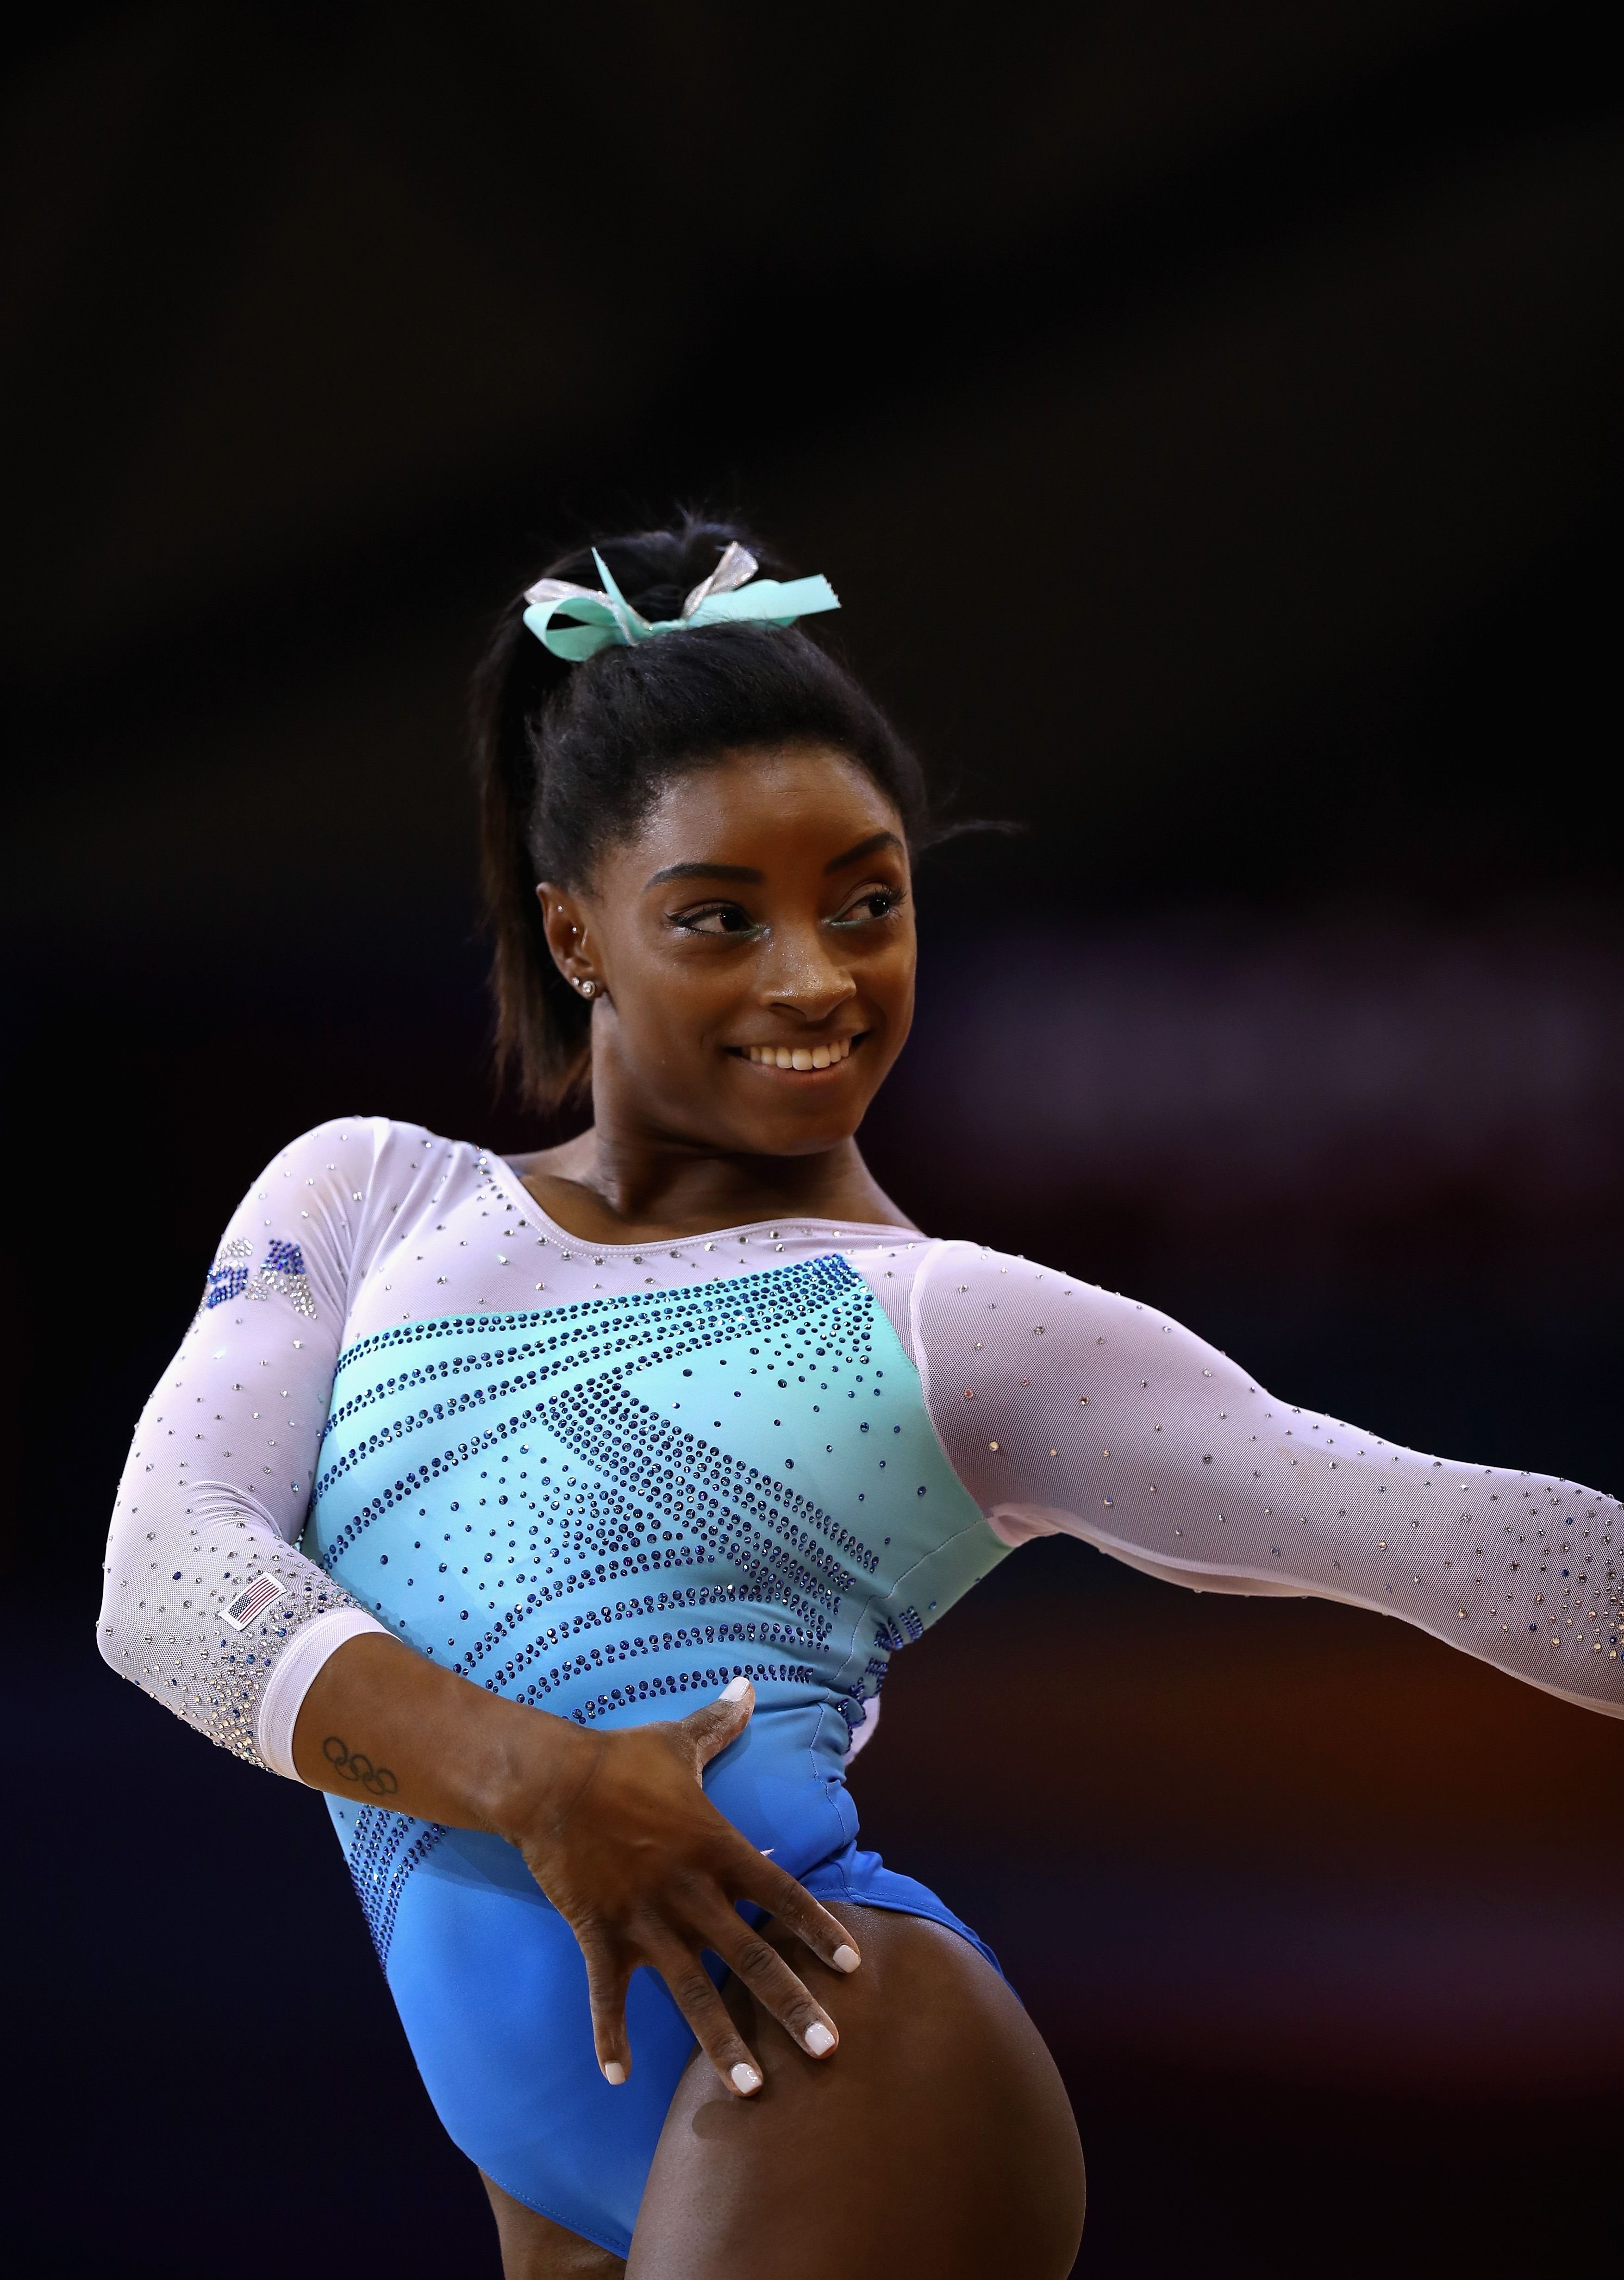 Simone Biles competing in the Women's All-Round Final of the 2018 FIG Artistic Gymnastics Championships on November 1, 2018 in Qatar. | Photo: Getty Images